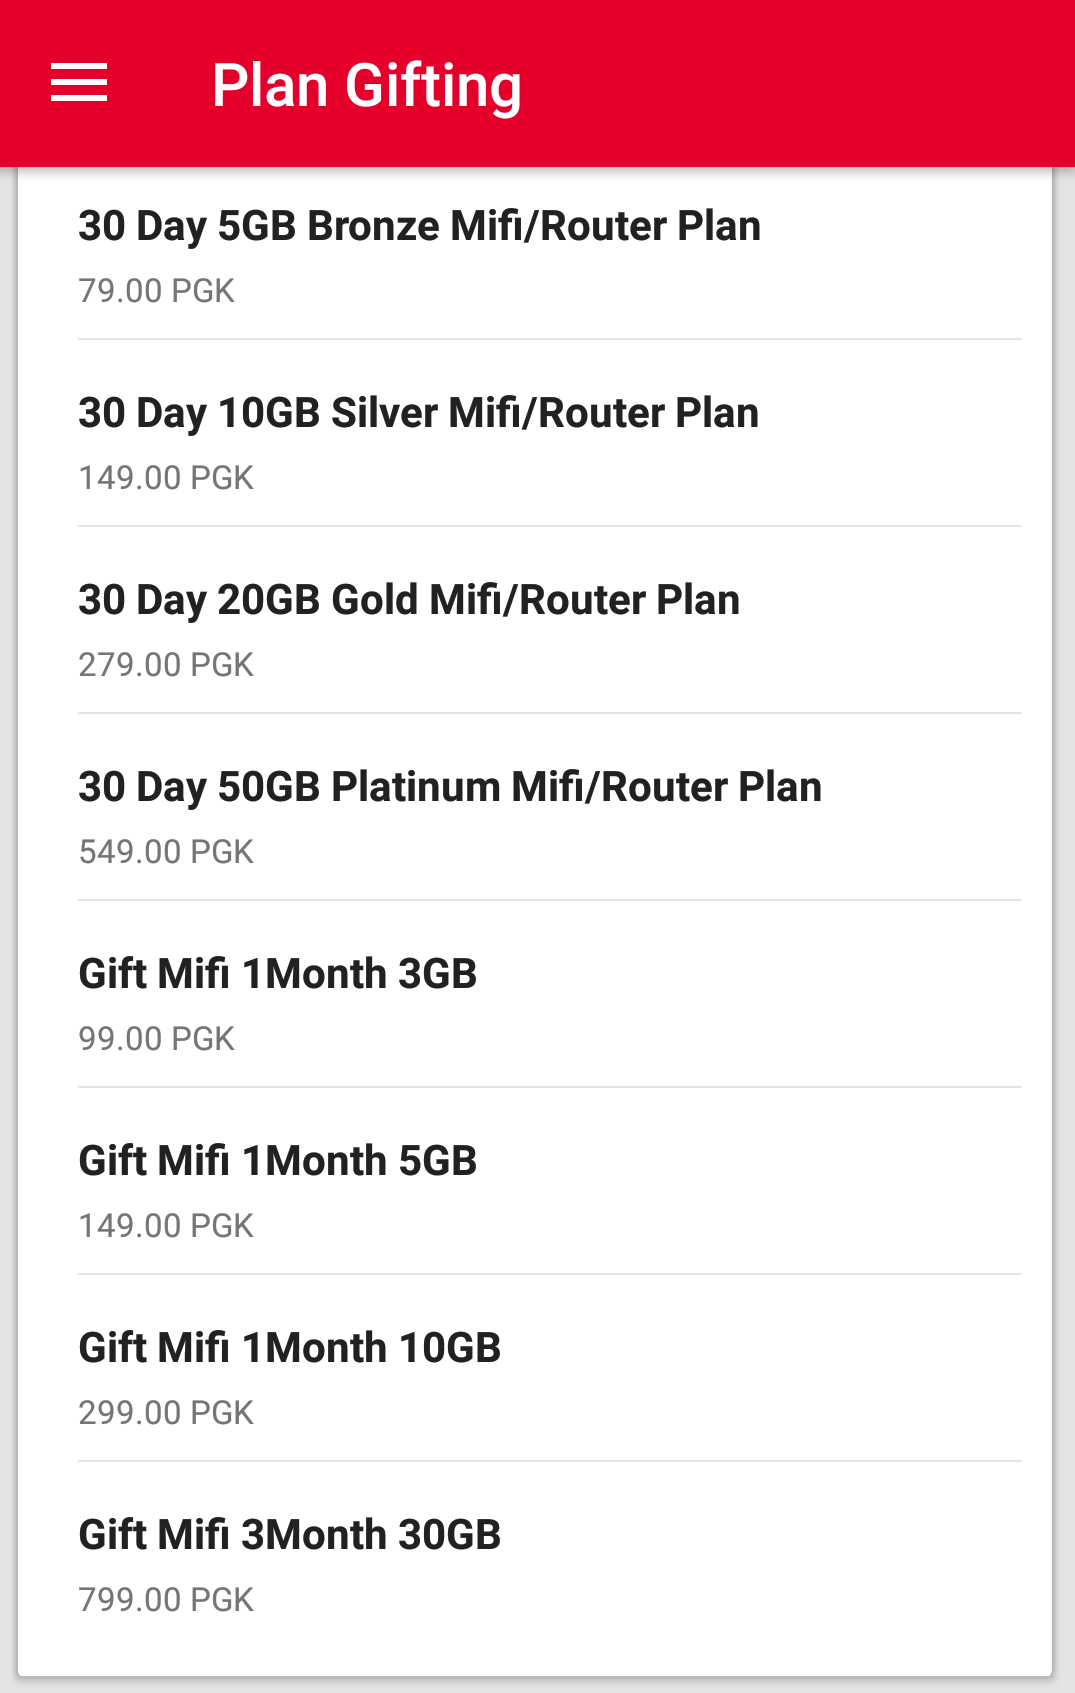 Digicel Gifted Mifi plans.